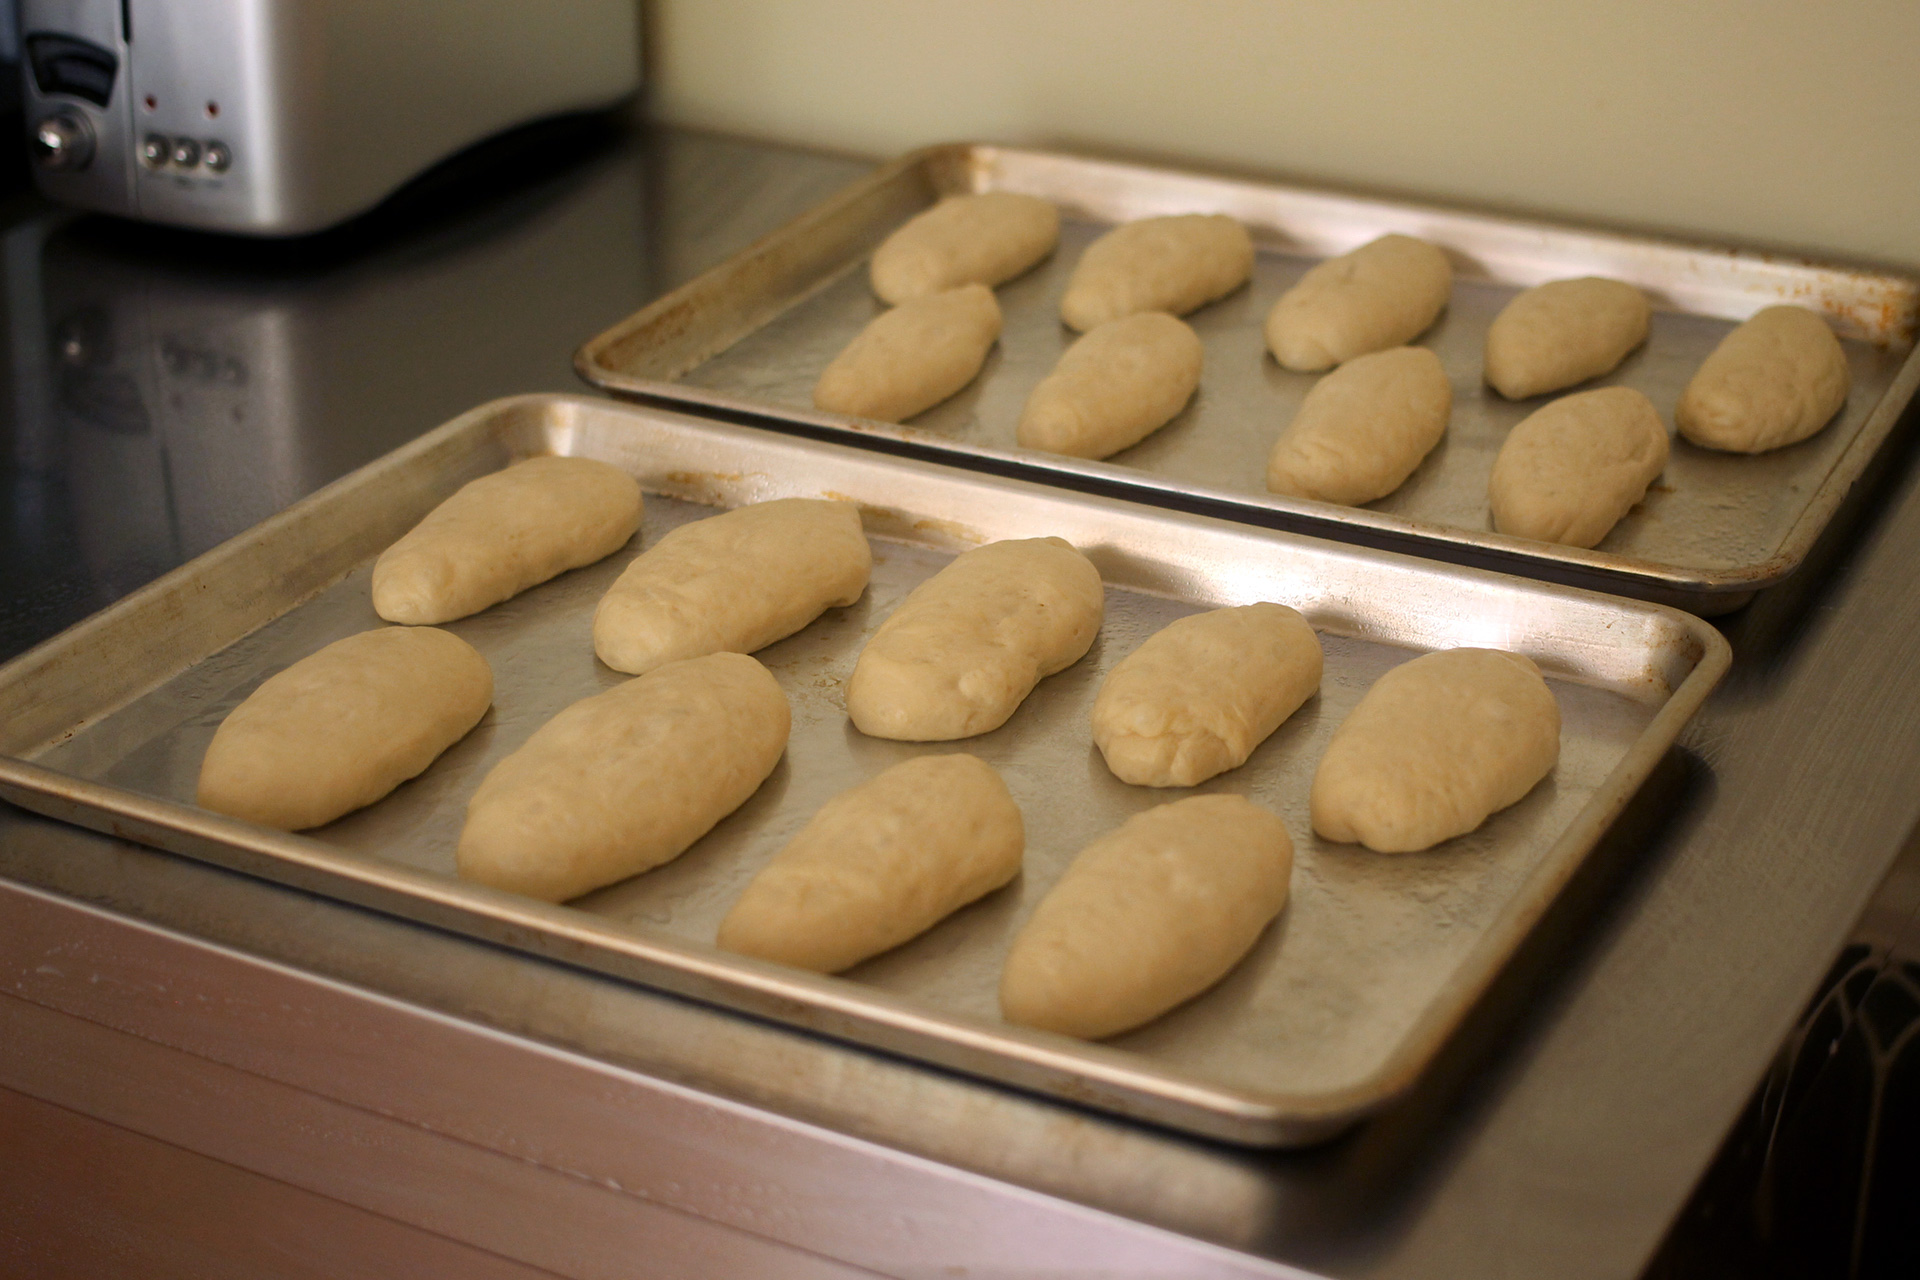 After rolling the balls into cylinders, place them on parchment-lined baking sheets — not greased sheets as you see above. (The buns will stick!)